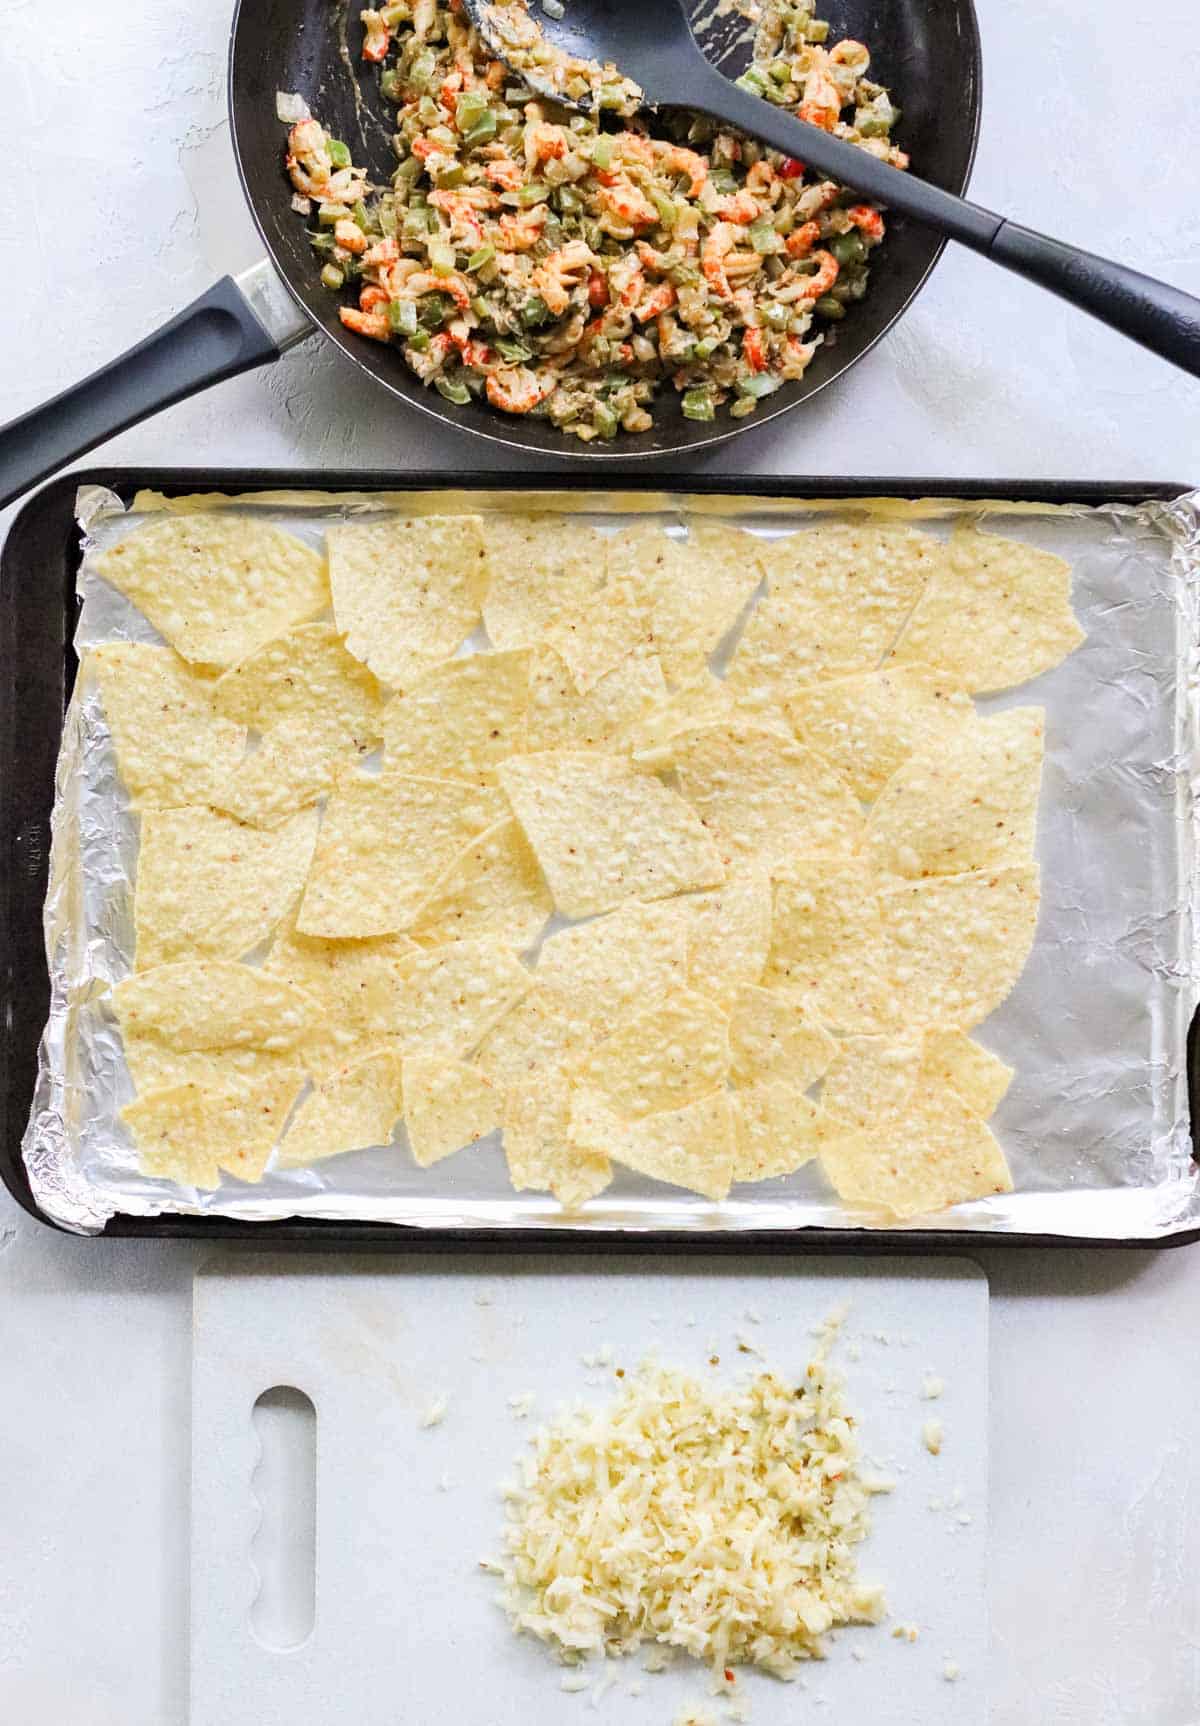 cutting board with shredded cheese, baking sheet lined with foil with tortilla chips, and a skillet full of cooked crawfish and veggies.